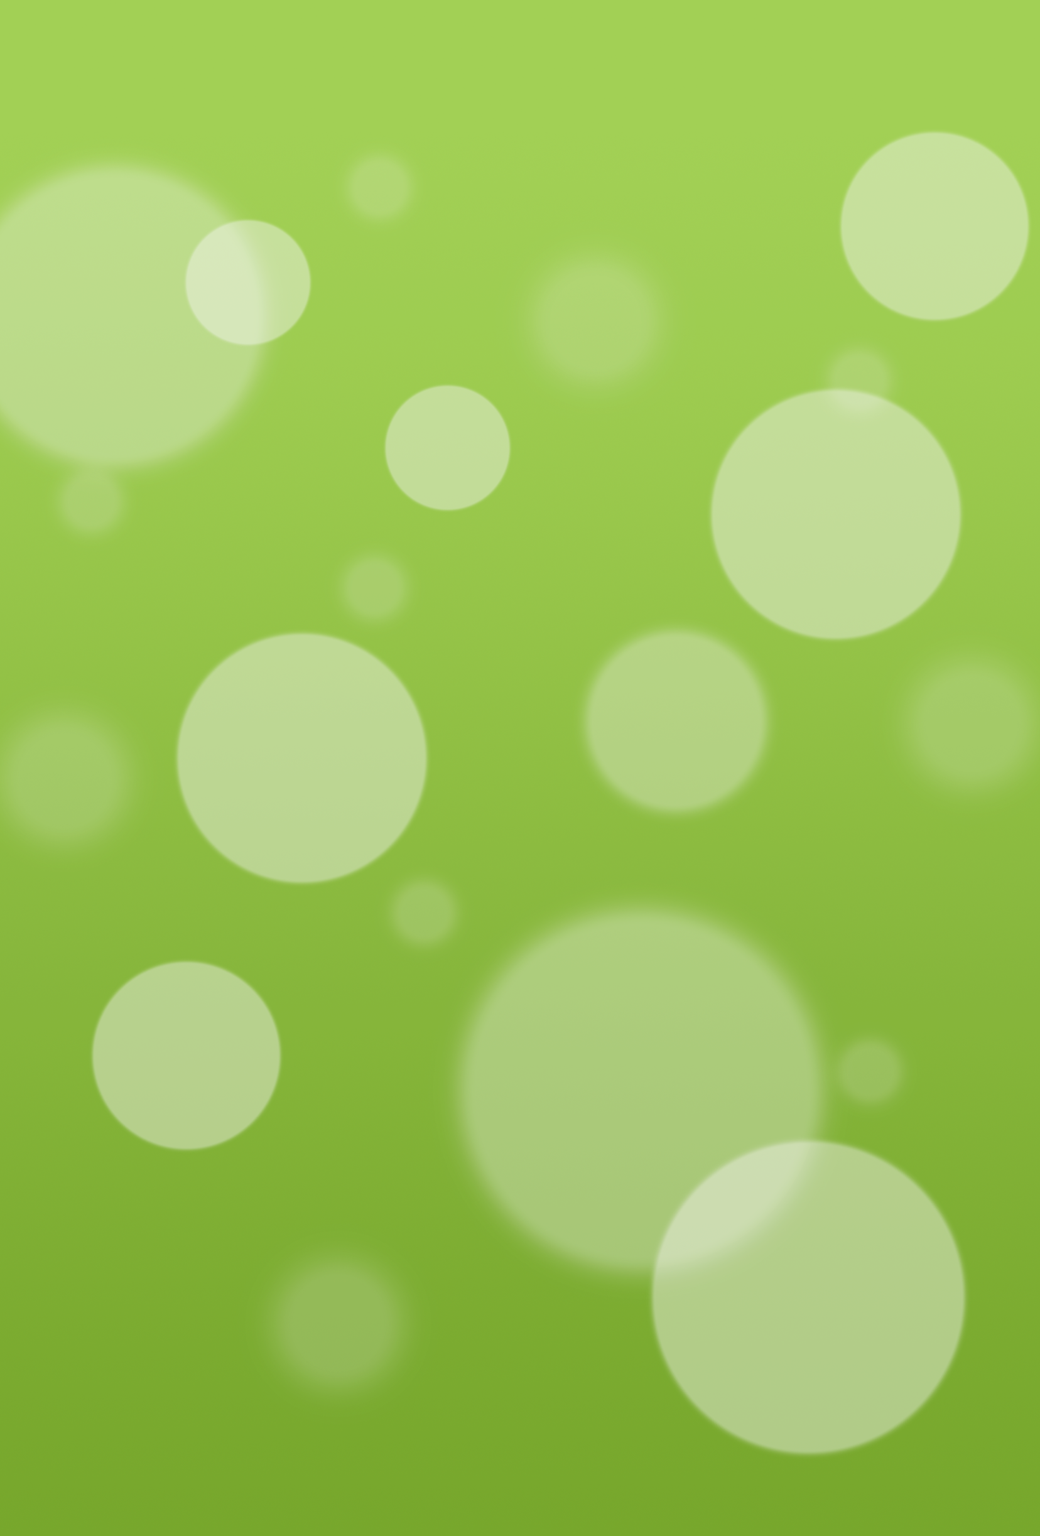 holiday_green_iPhone_ios7.png